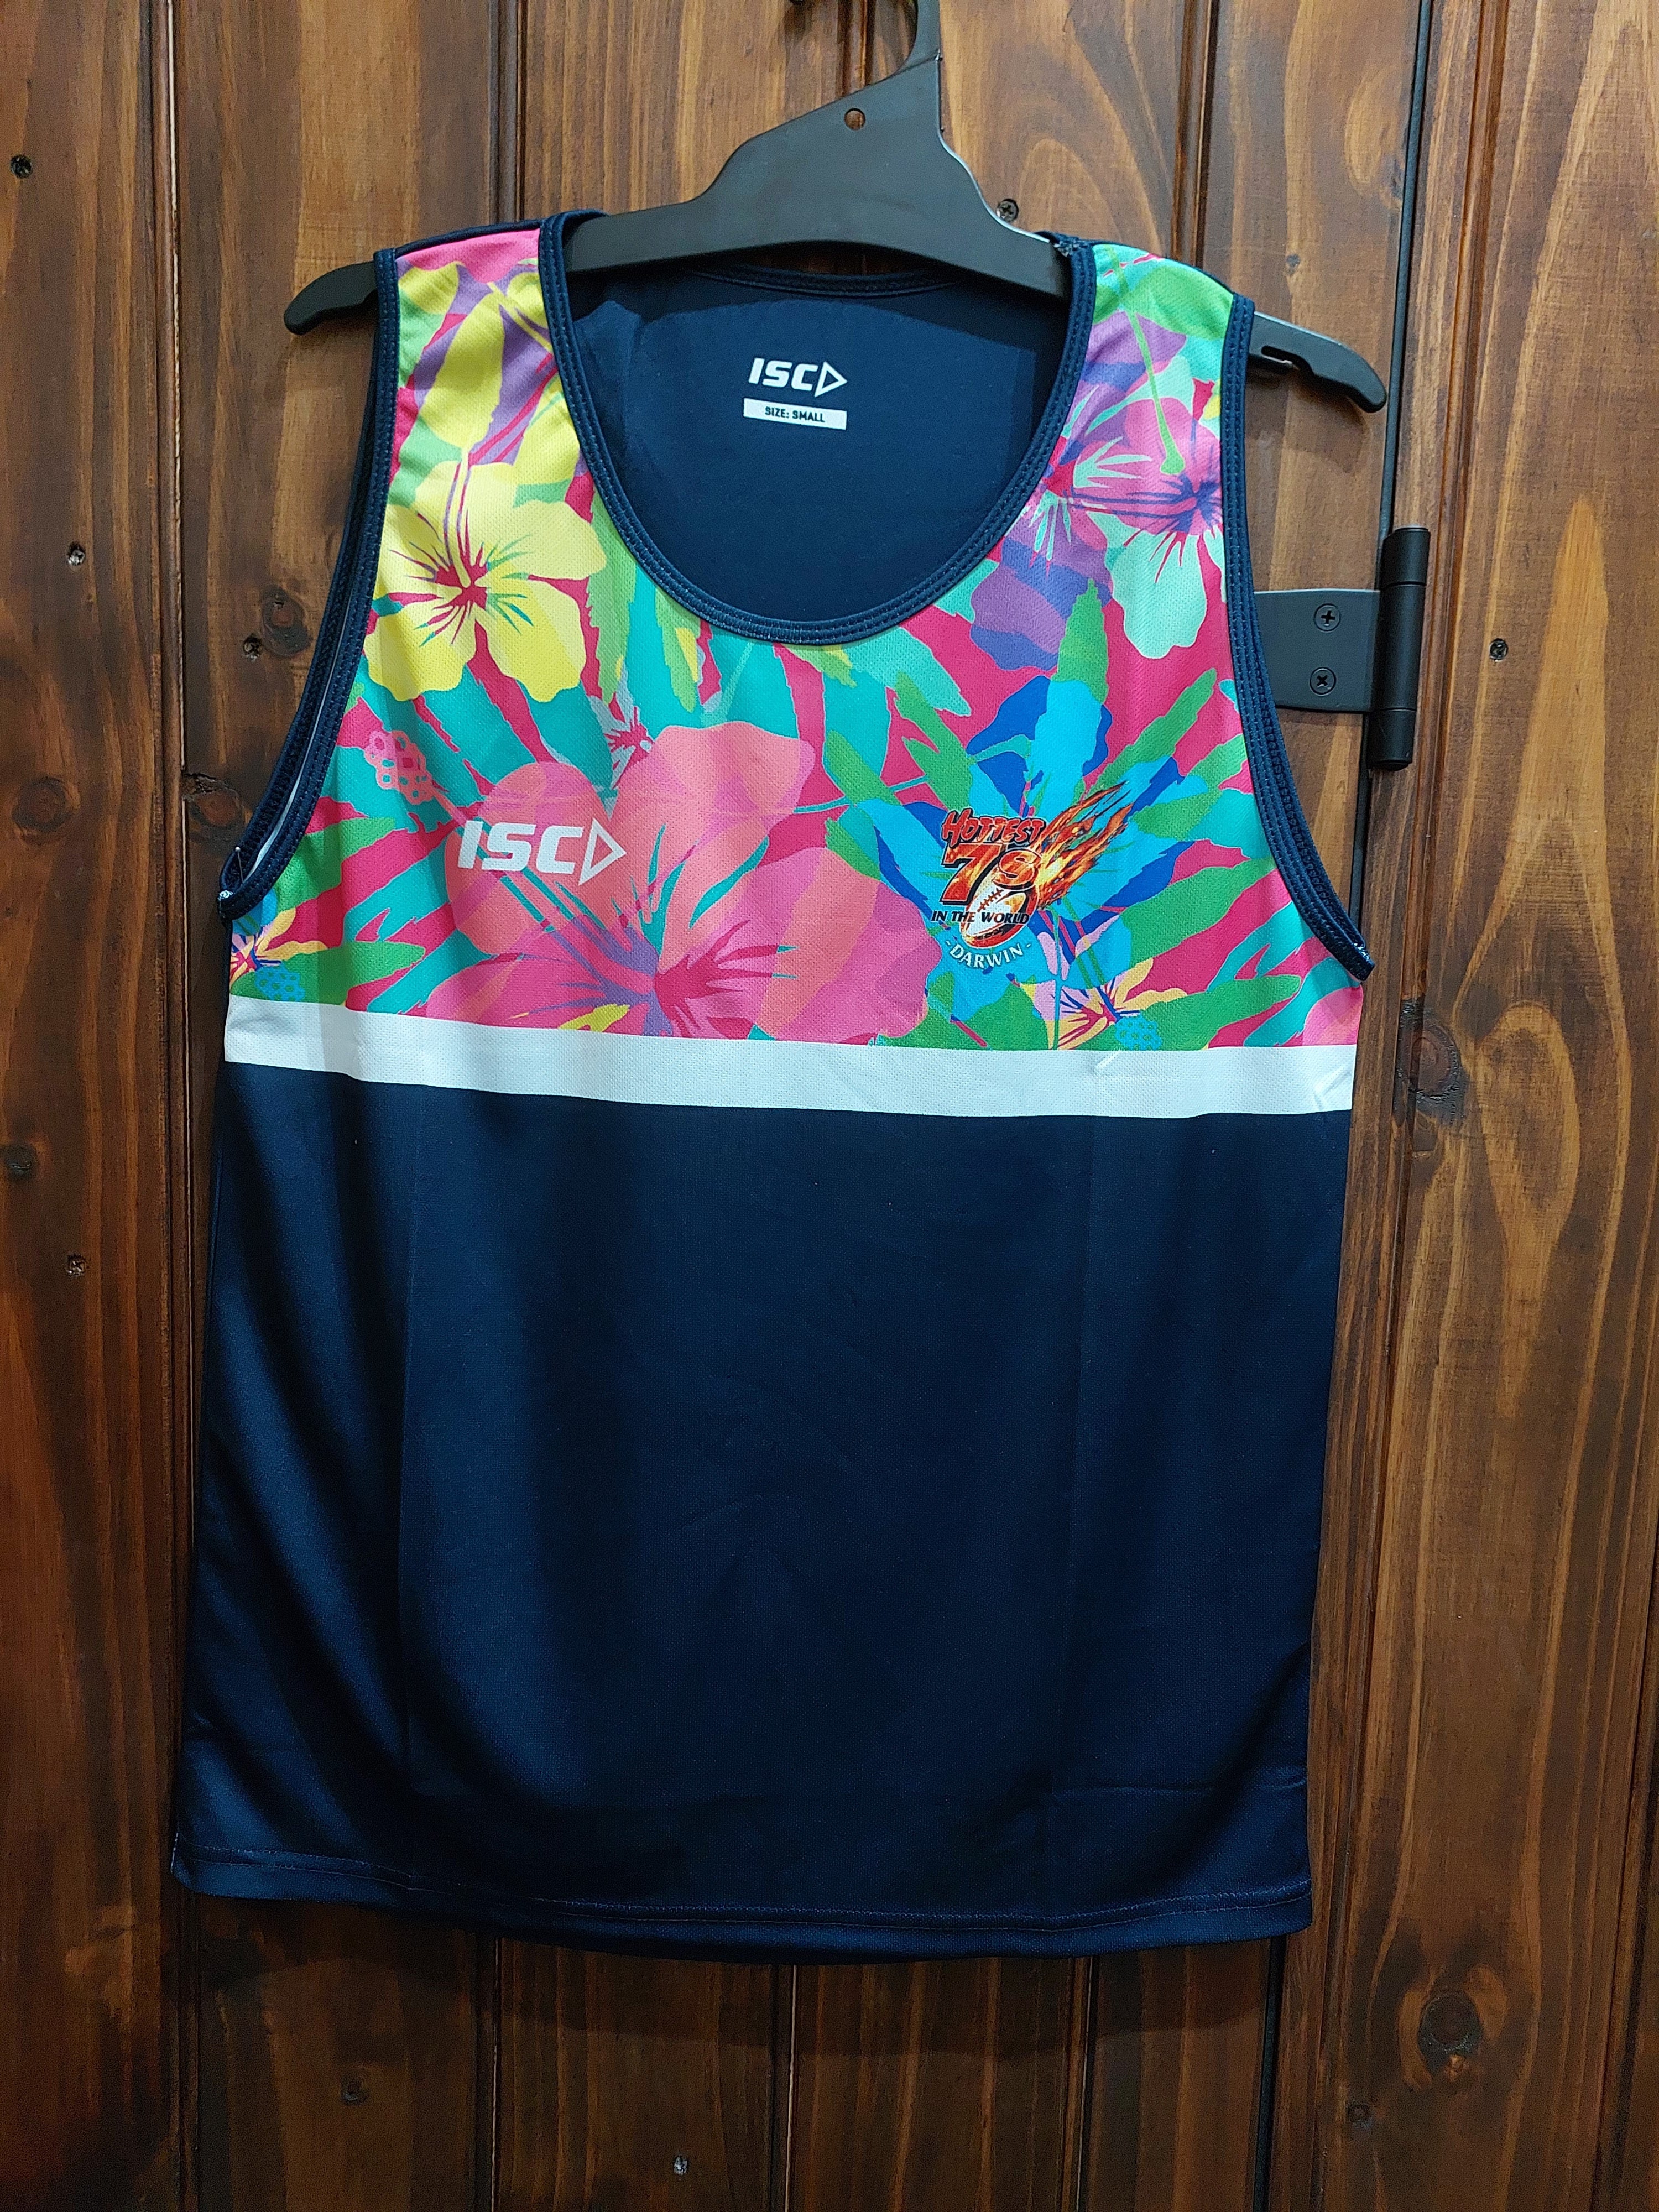 Hottest 7s Singlet 22 - The Rugby Shop Darwin